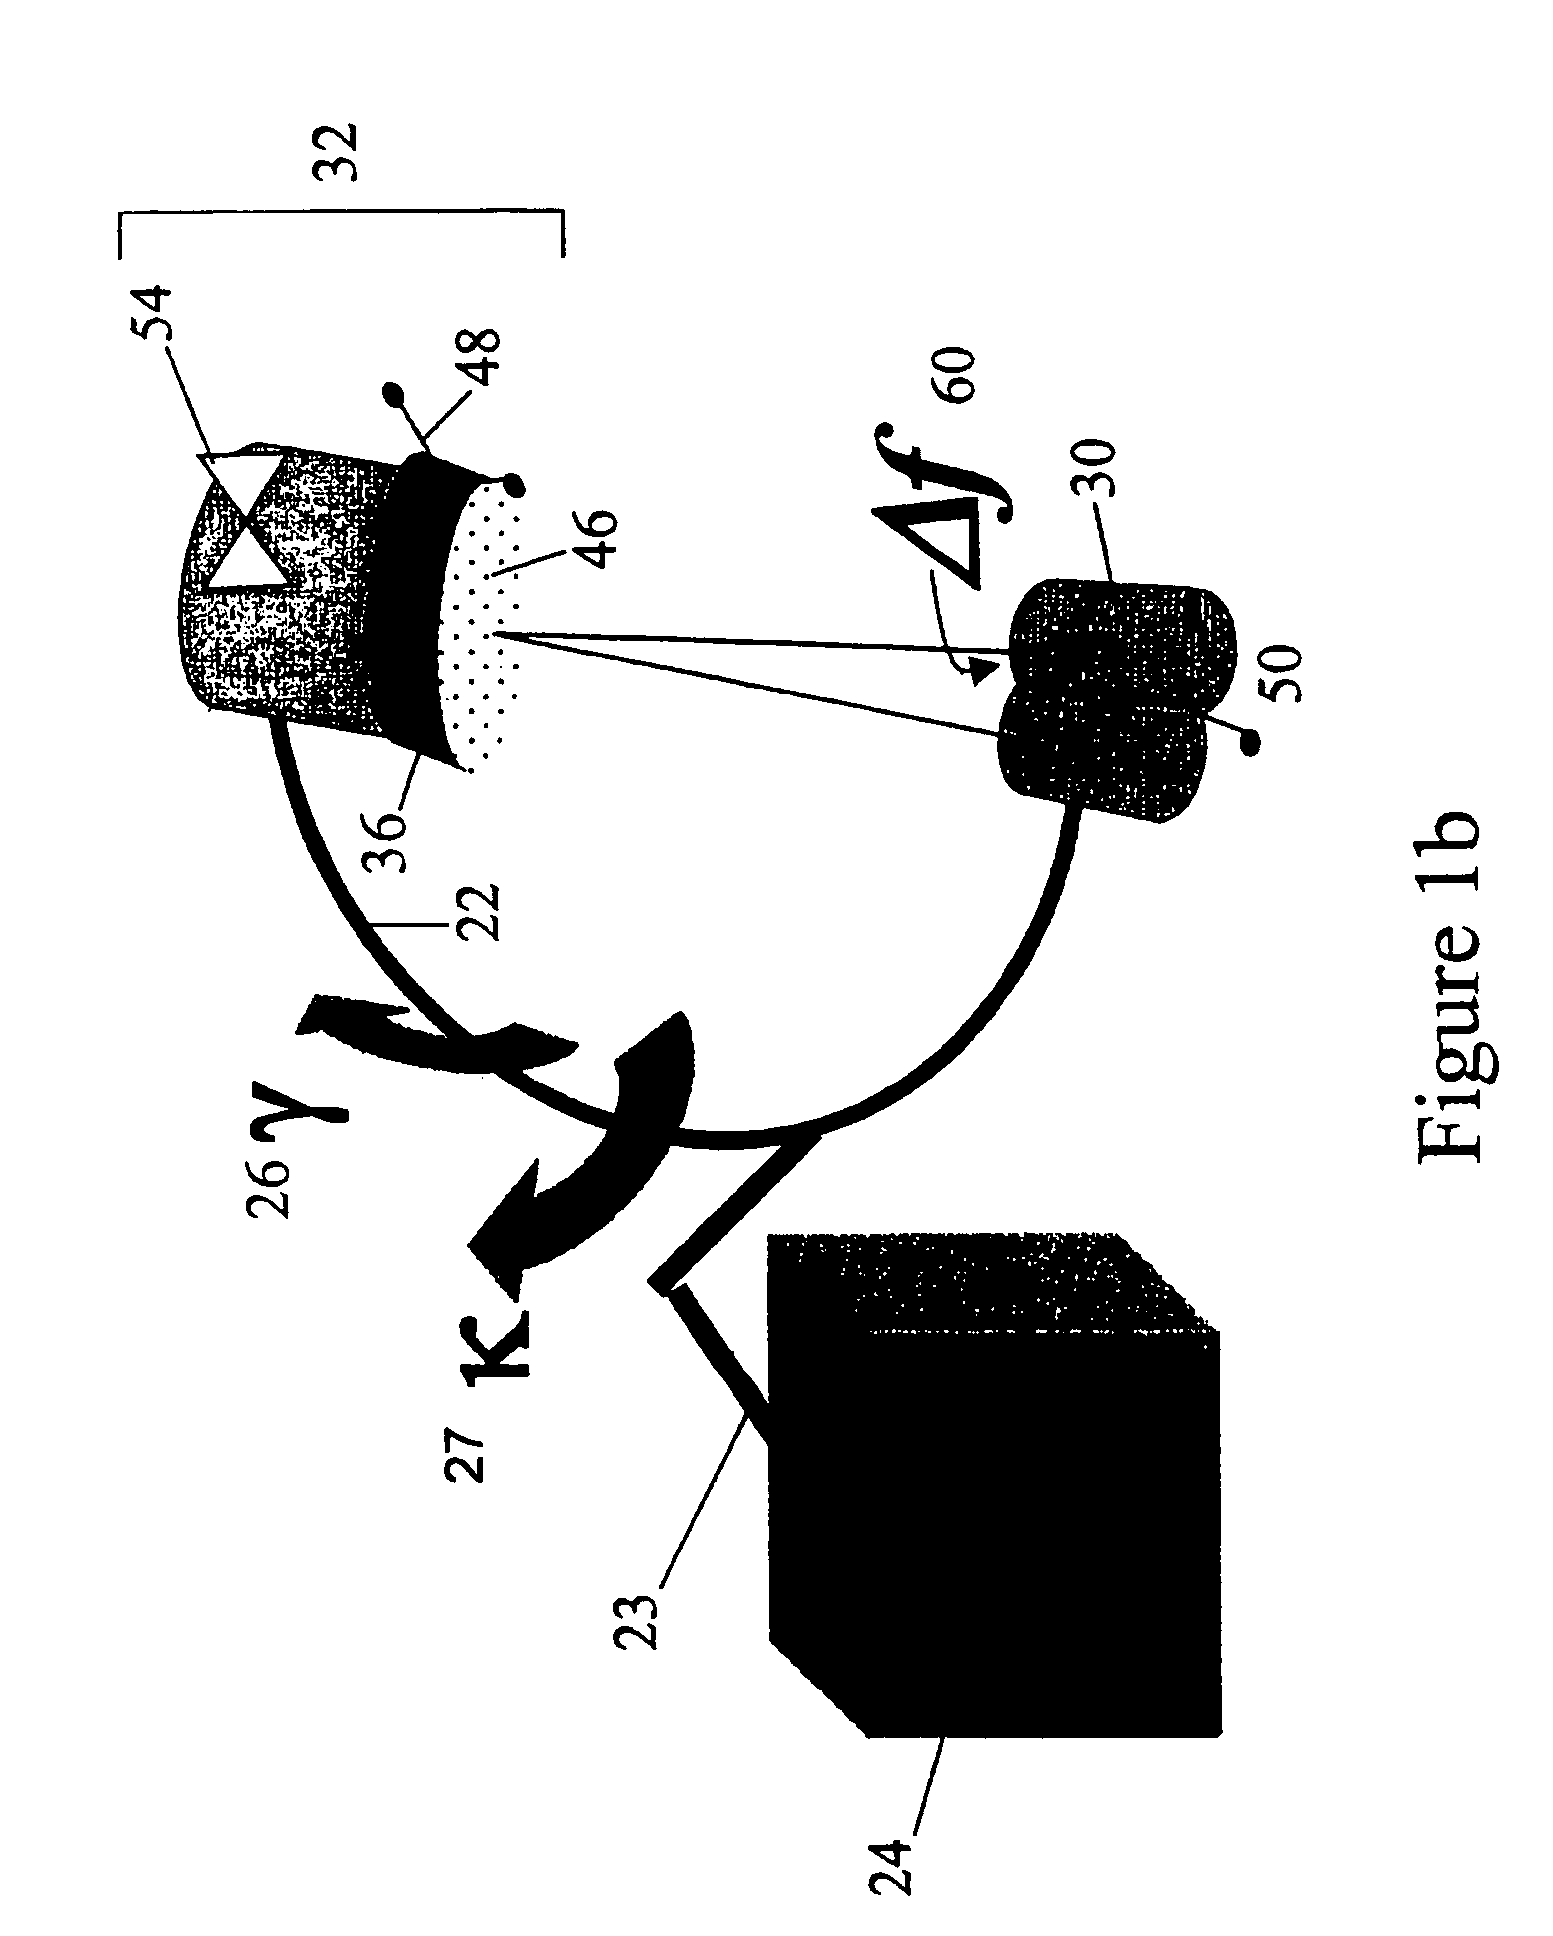 Apparatus, system and method of calibrating medical imaging systems